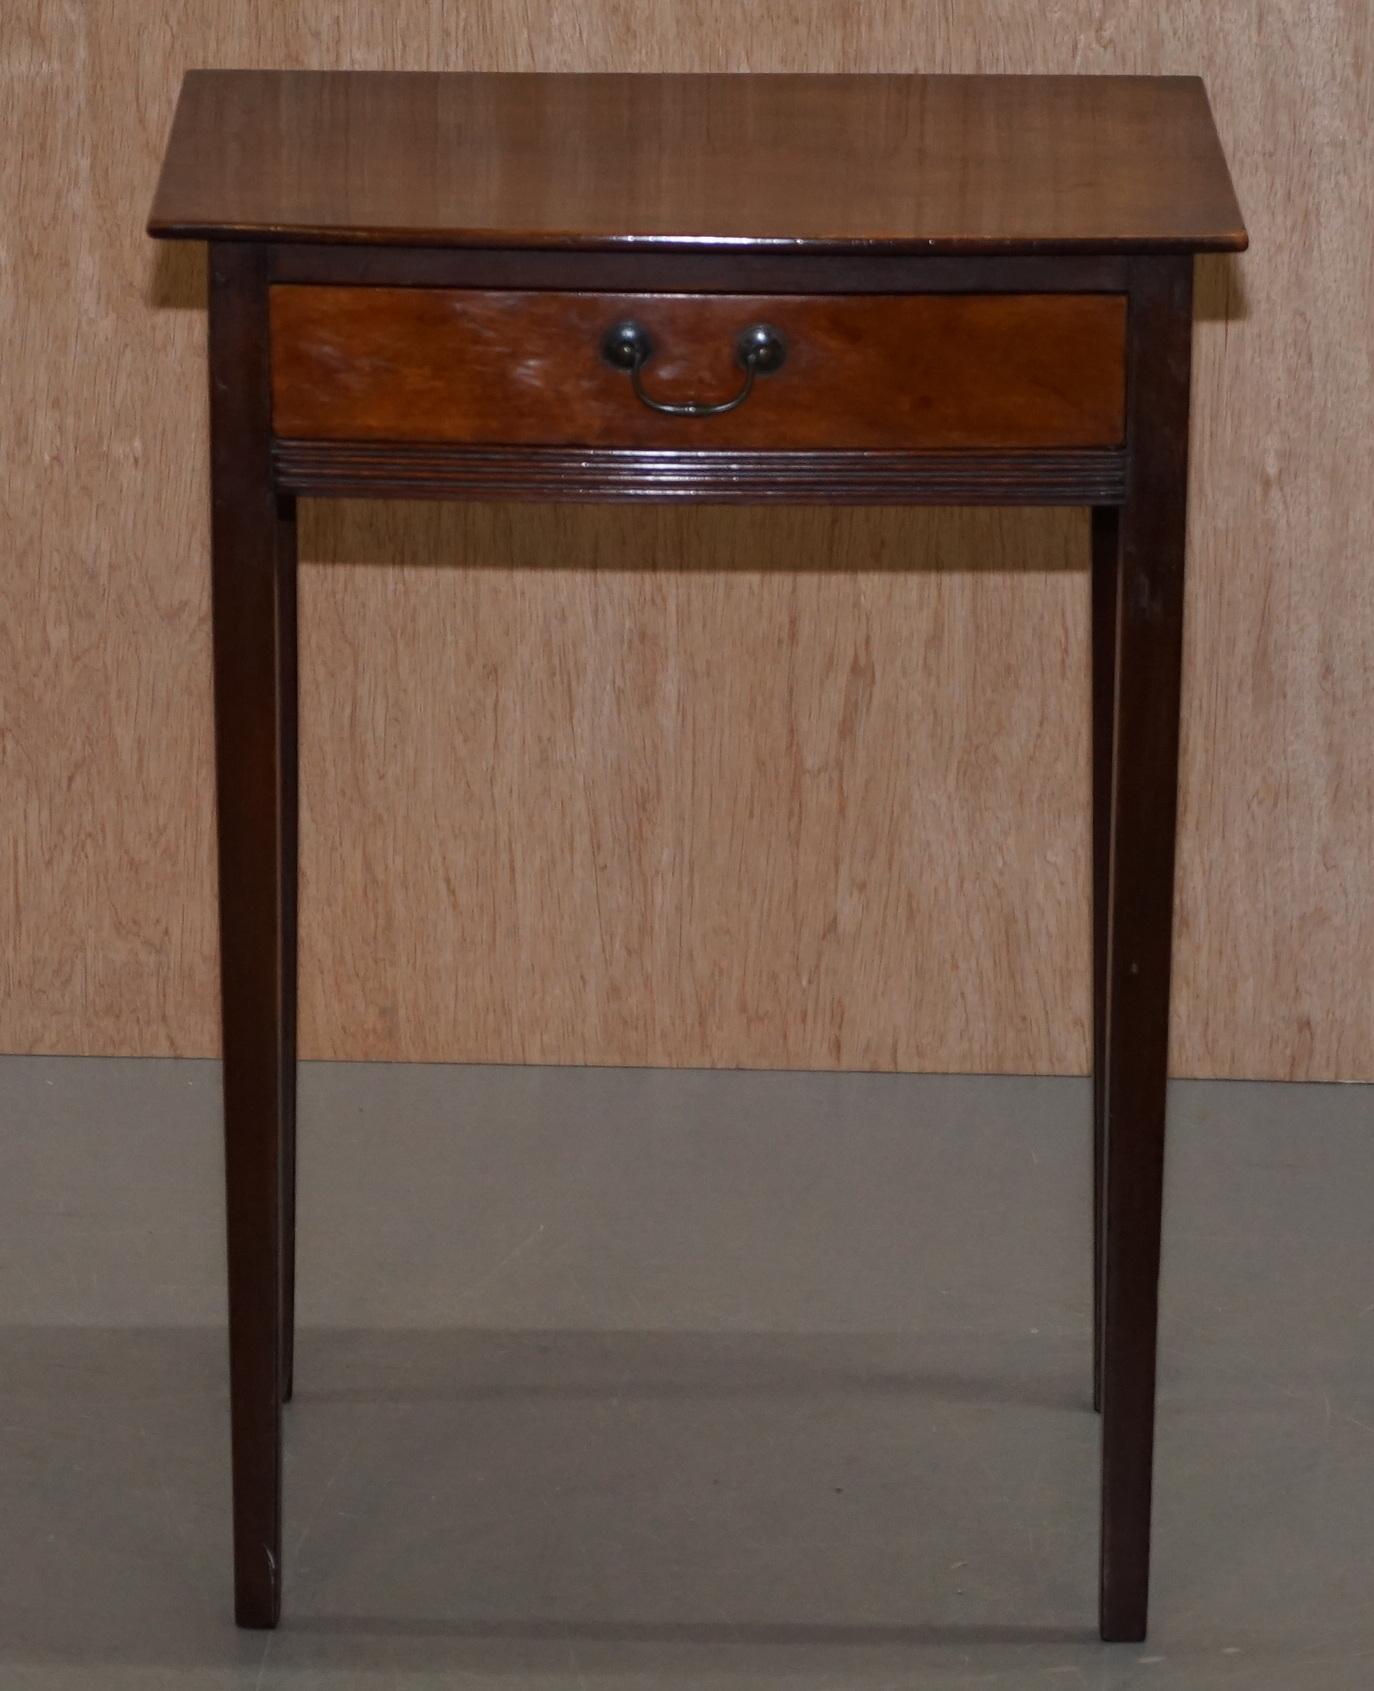 We are delighted to offer for sale this lovely original Victorian mahogany lamp side end table with single drawer

A very good looking a utilitarian side table, ideally suite for a lamp and nice picture frame, the single drawer is shallow enough